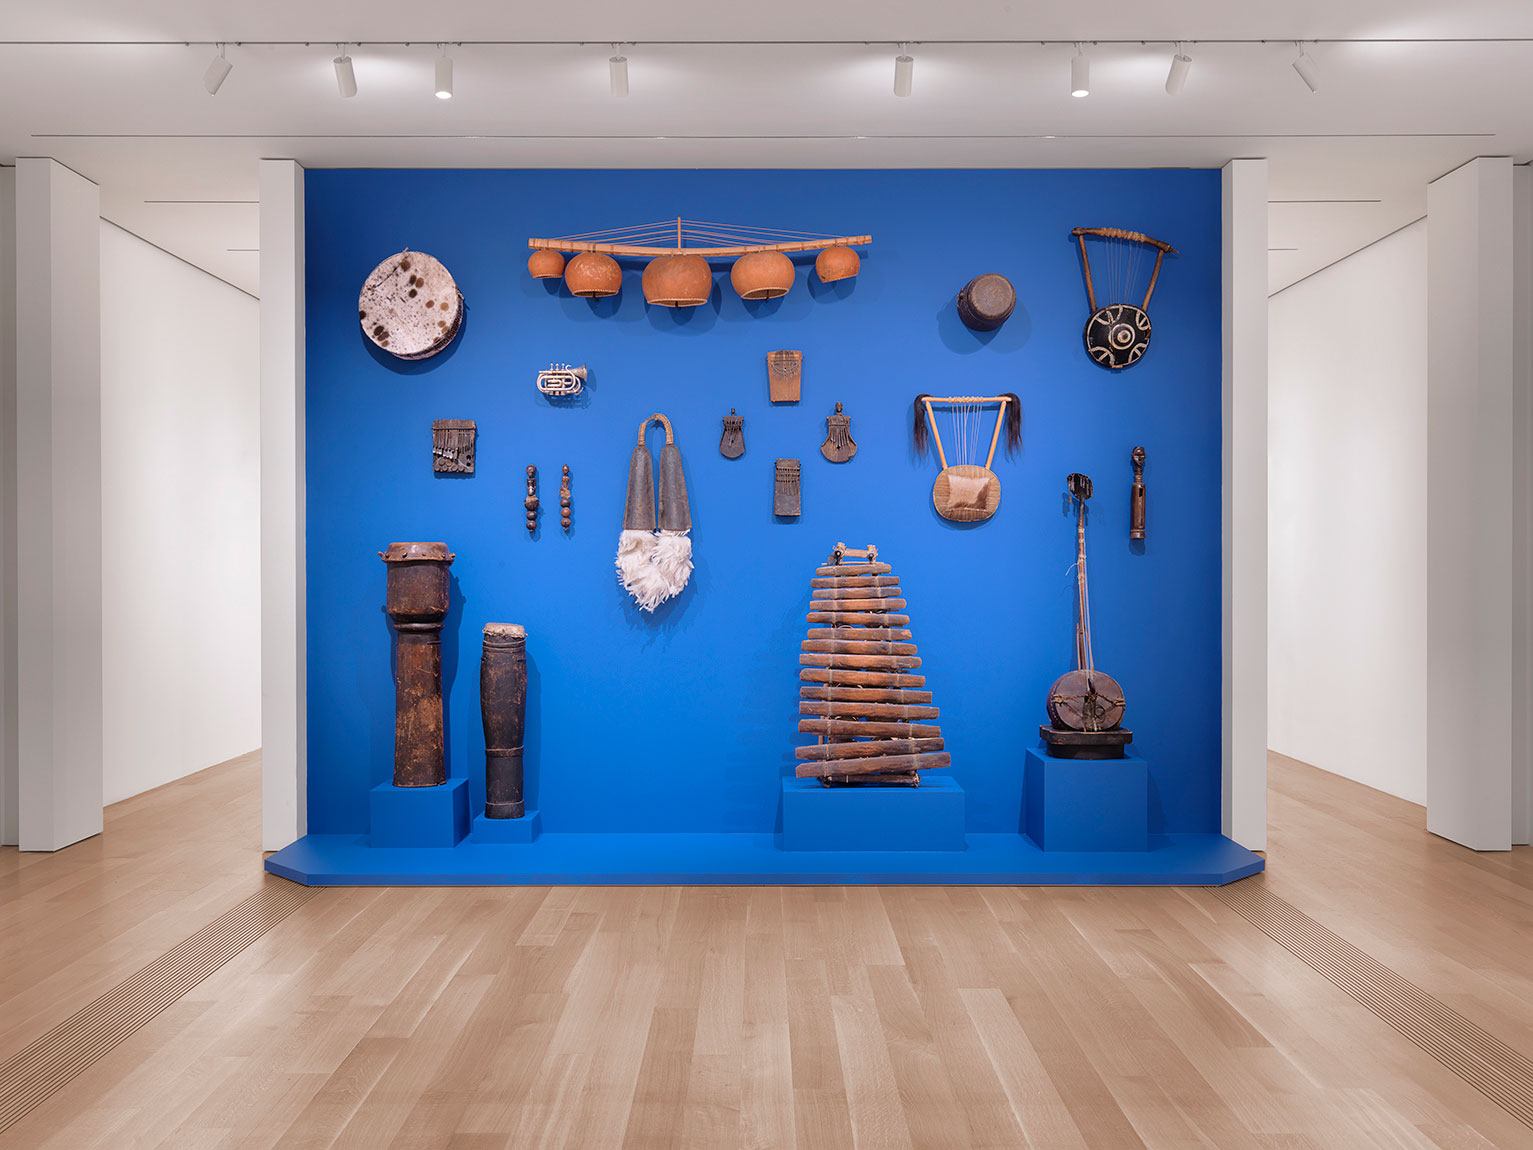 An exhibition view of Terry Adkins' collection of musical instruments, installed against a royal blue wall in the Lower East Gallery.